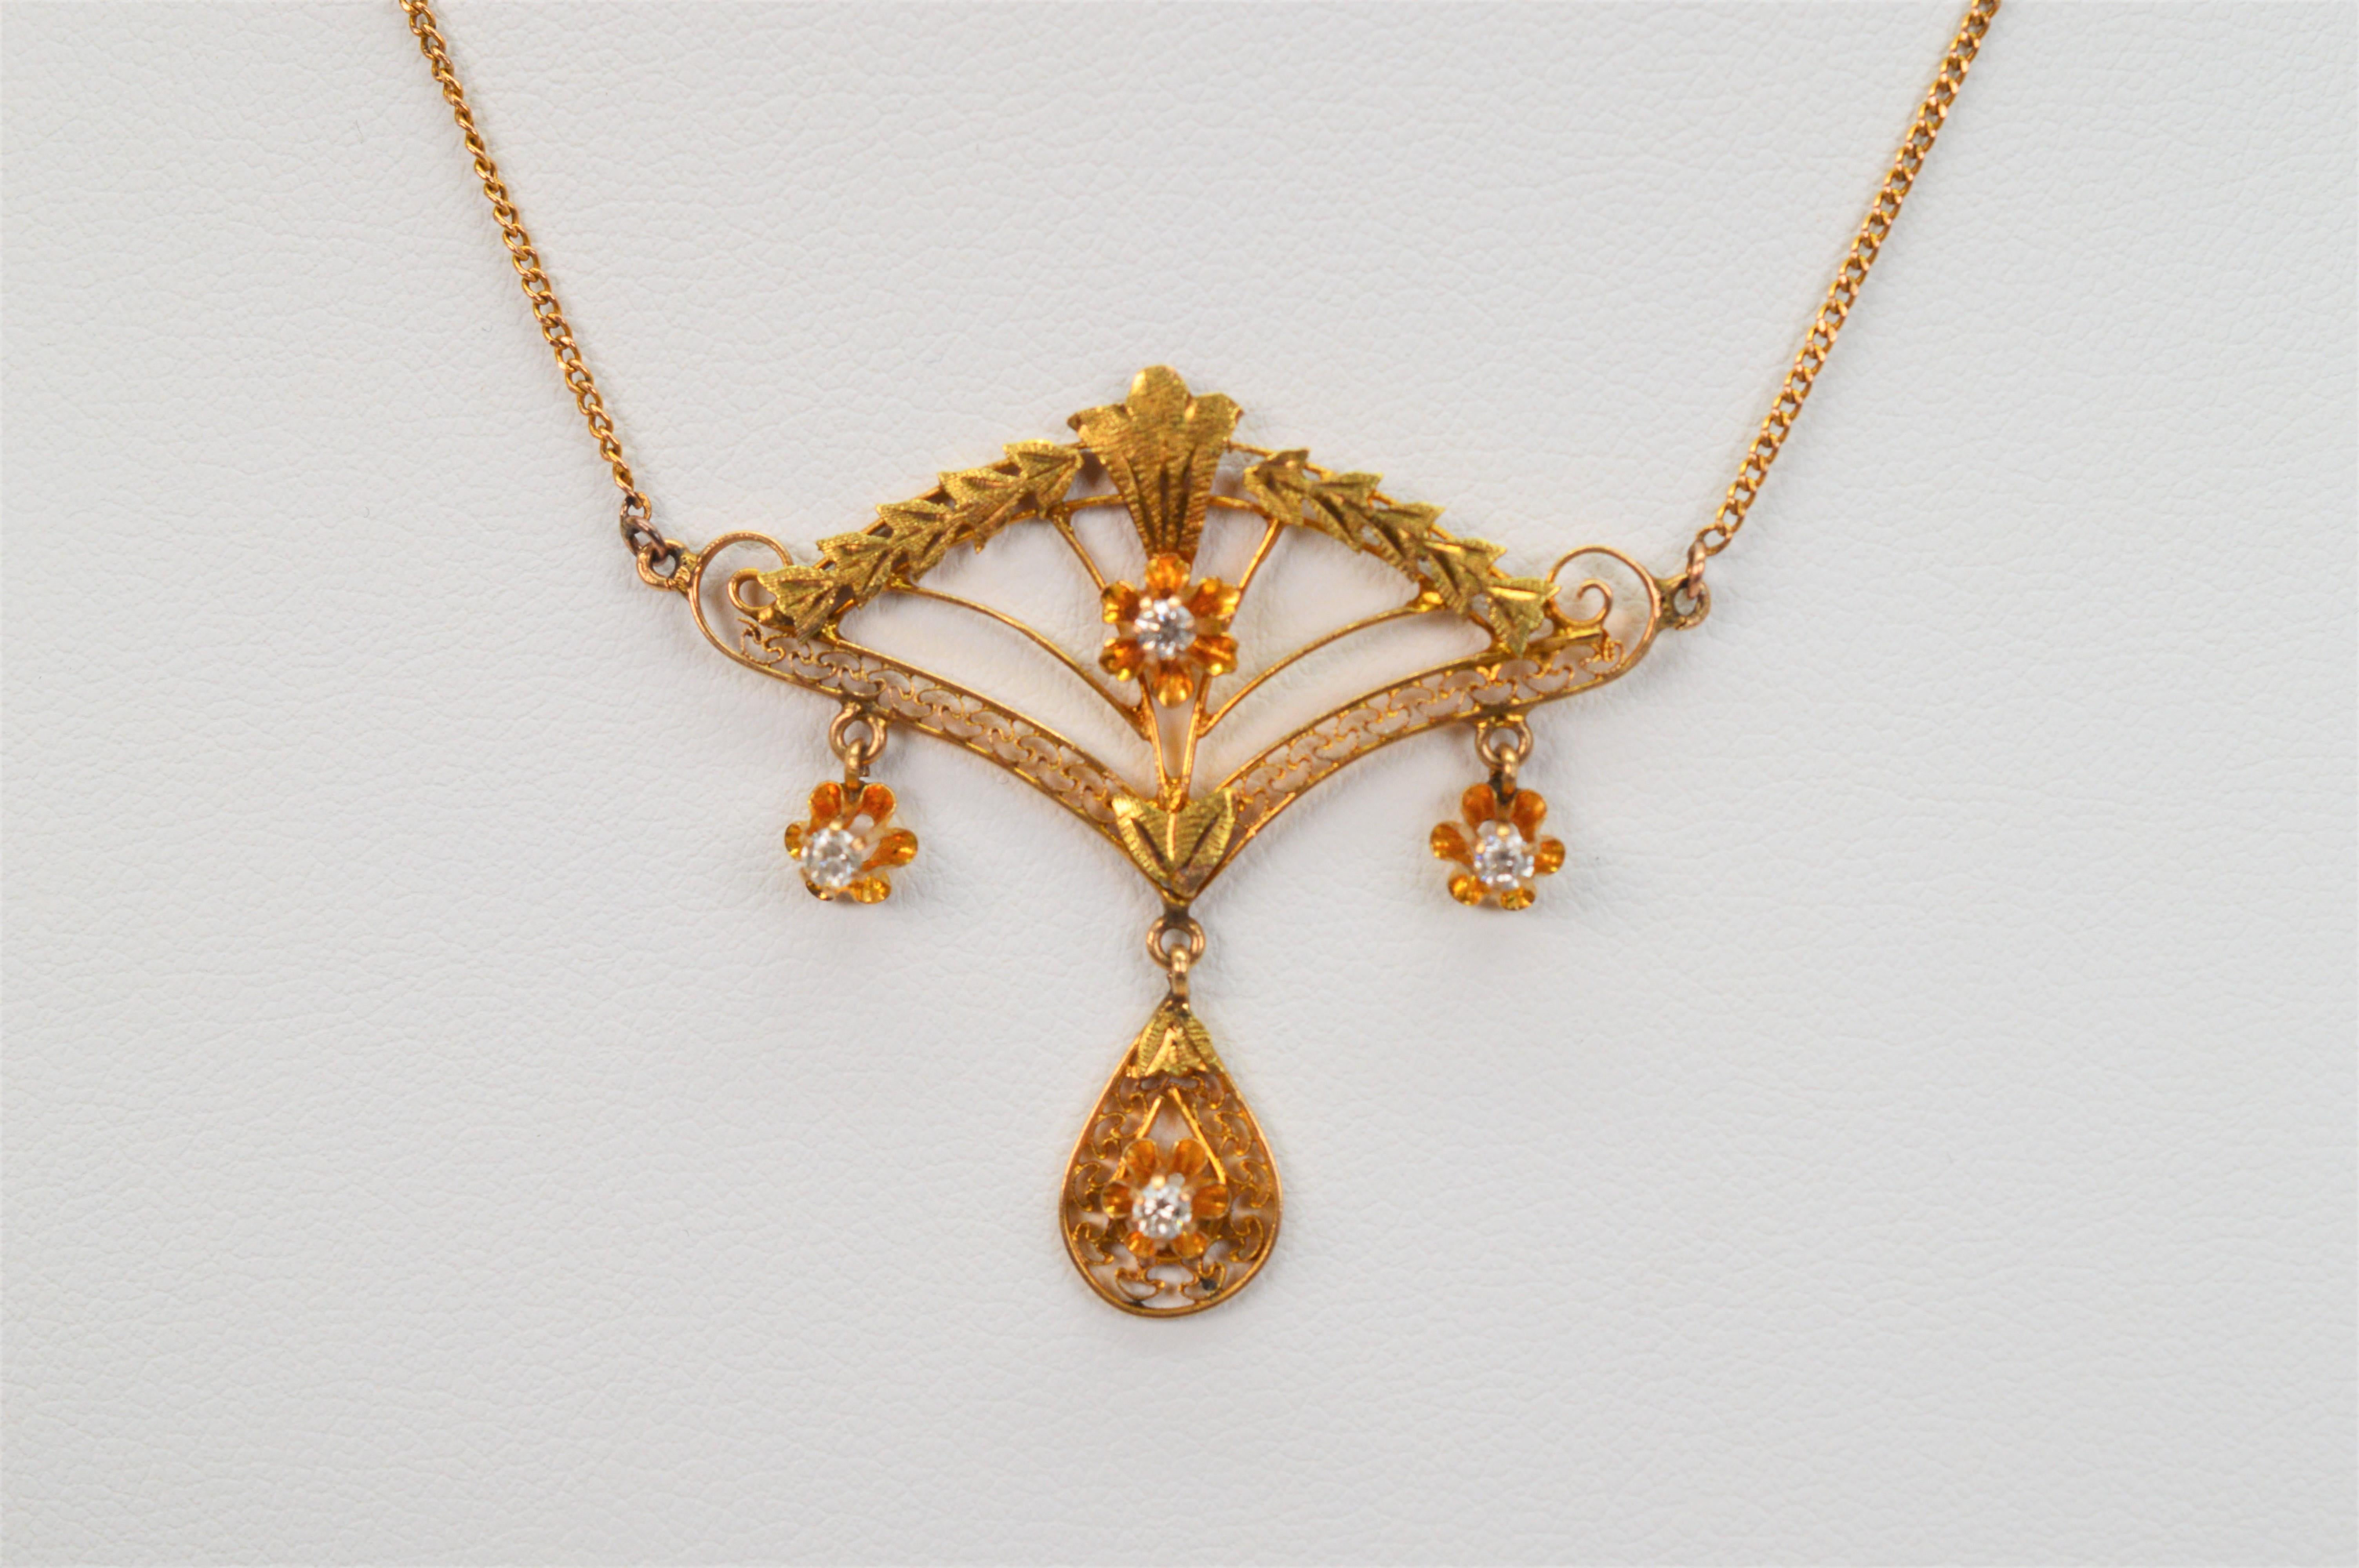 Elegant antique finery in Eduardian style is presented on this exquisite pendant necklace. An intricate and delicately appointed fan shaped filigree pendant with tear drop charm is crafted in ten karat 10K yellow gold and accented with four round